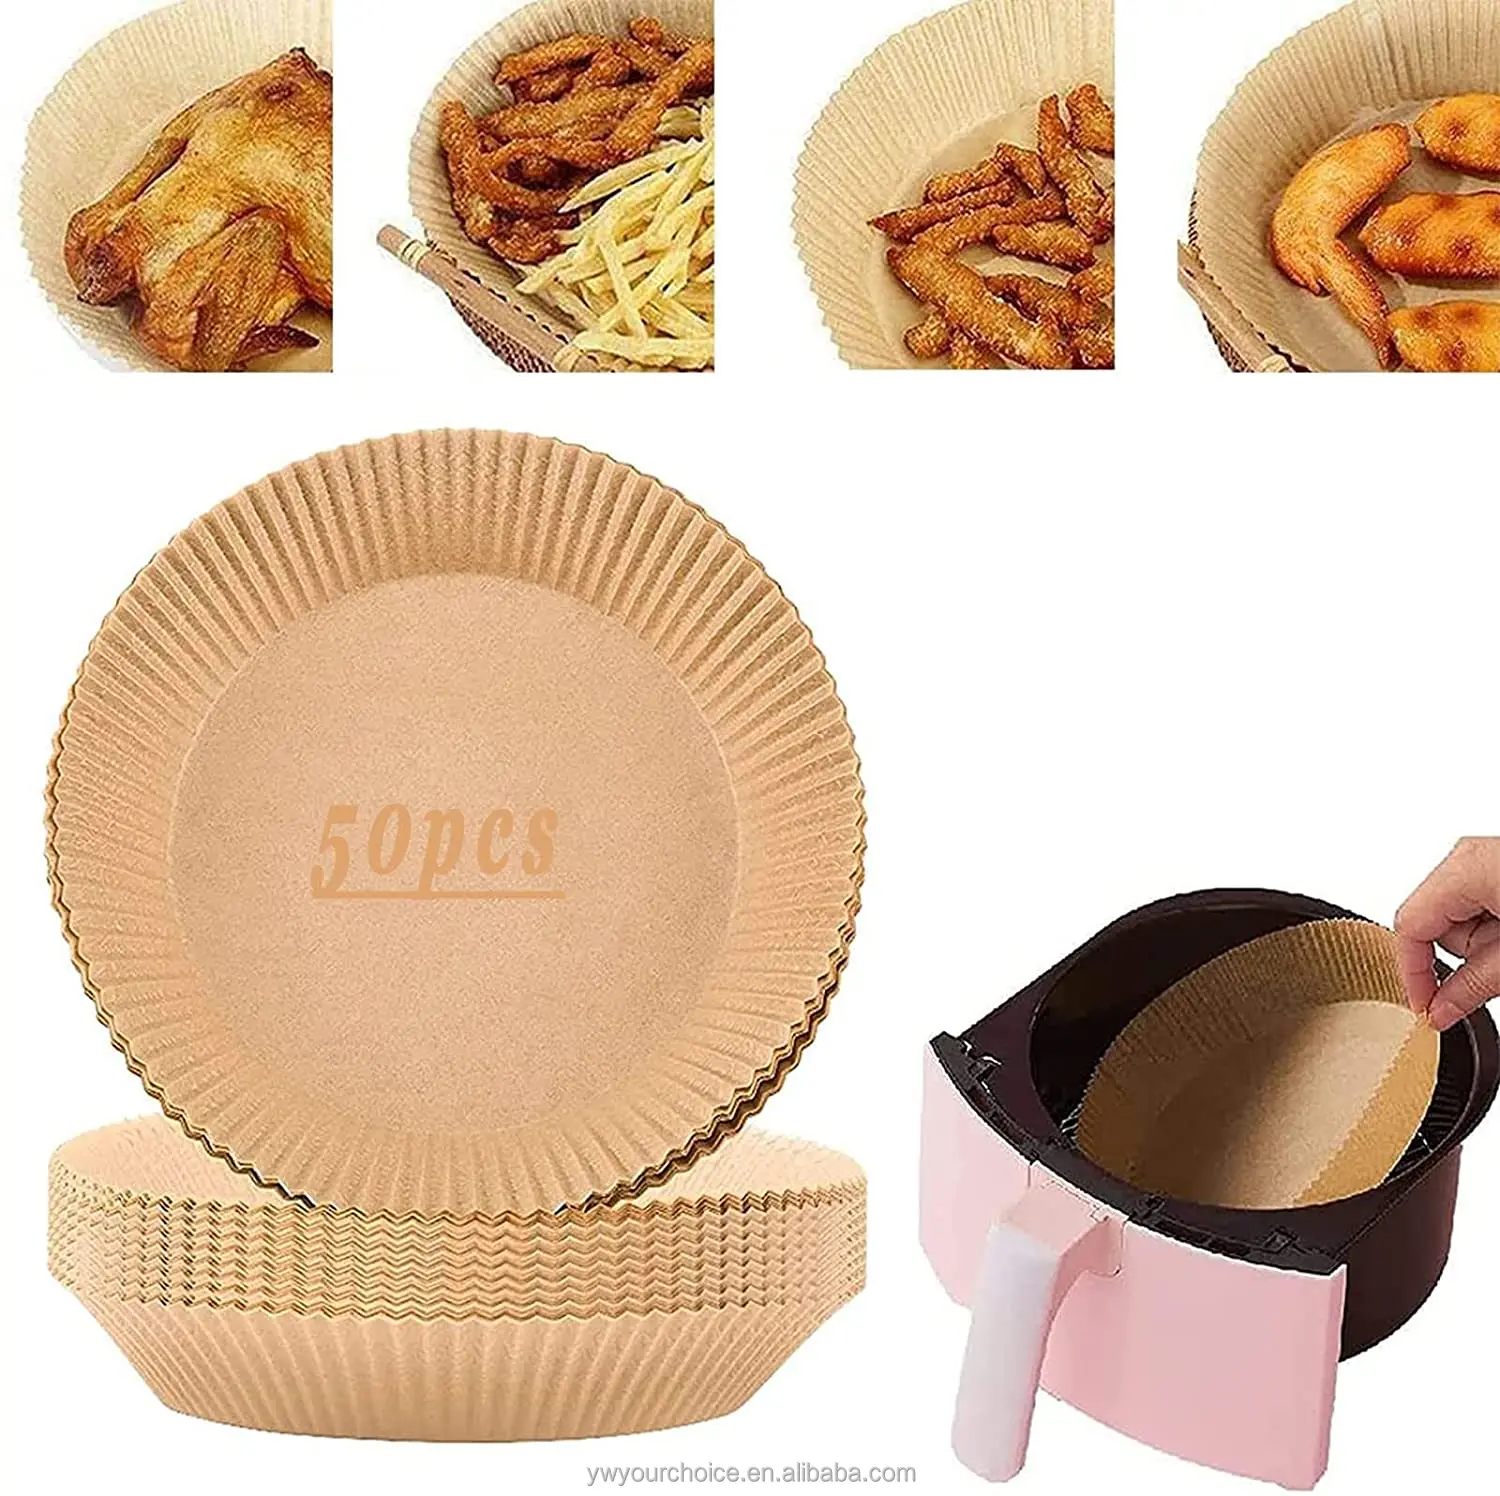 50pcs Nonstick Disposable Air Fryer Liners 6.3in Square Baking